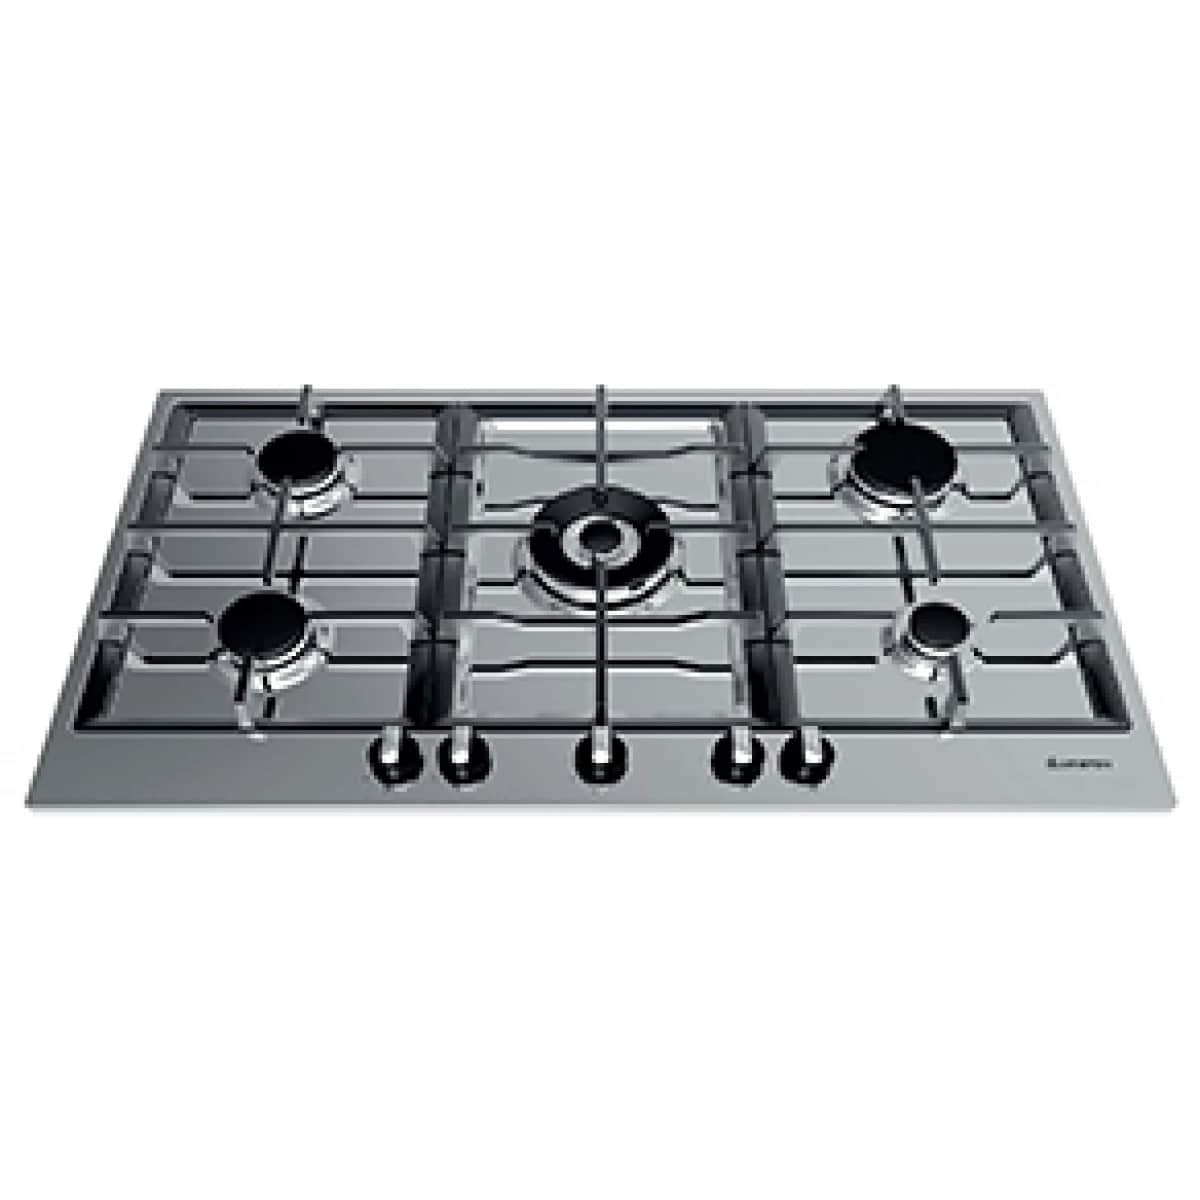 Ariston Built-in Gas Hob 90 cm Cast Iron Triple Burners Stainless PK 951 T GH